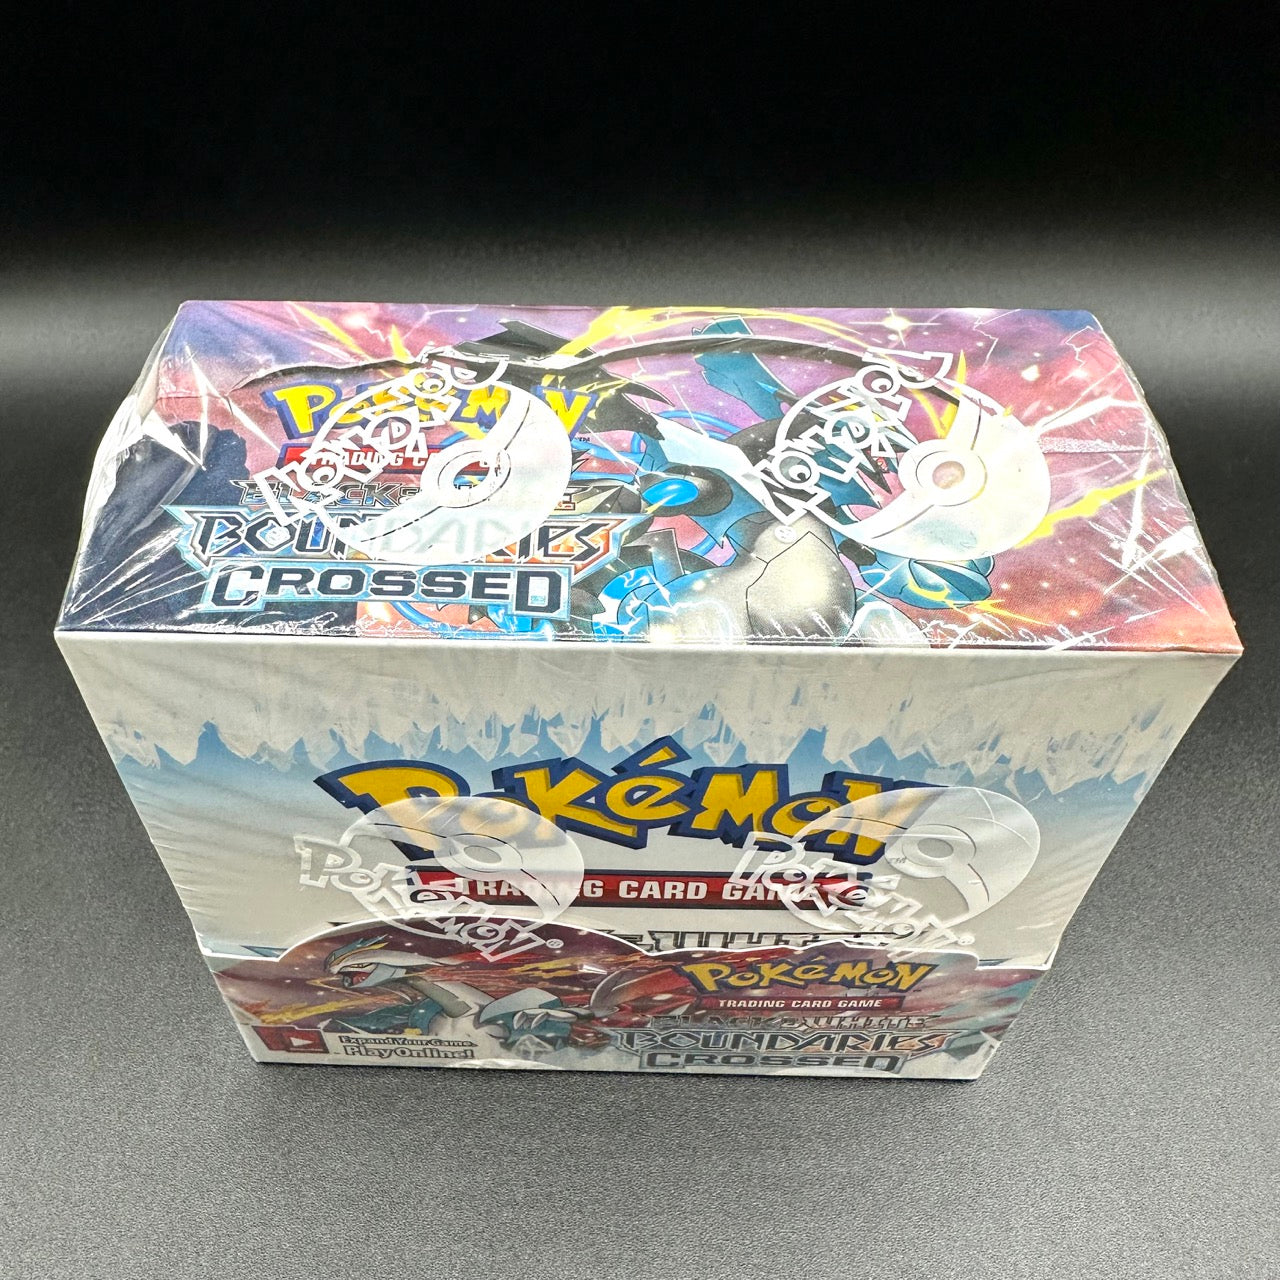 
                  
                    Image of a Pokémon Black and White Boundaries Crossed Booster Box, featuring 36 packs of 10 cards from the Boundaries Crossed expansion. Ideal for collectors and Pokémon players.
                  
                